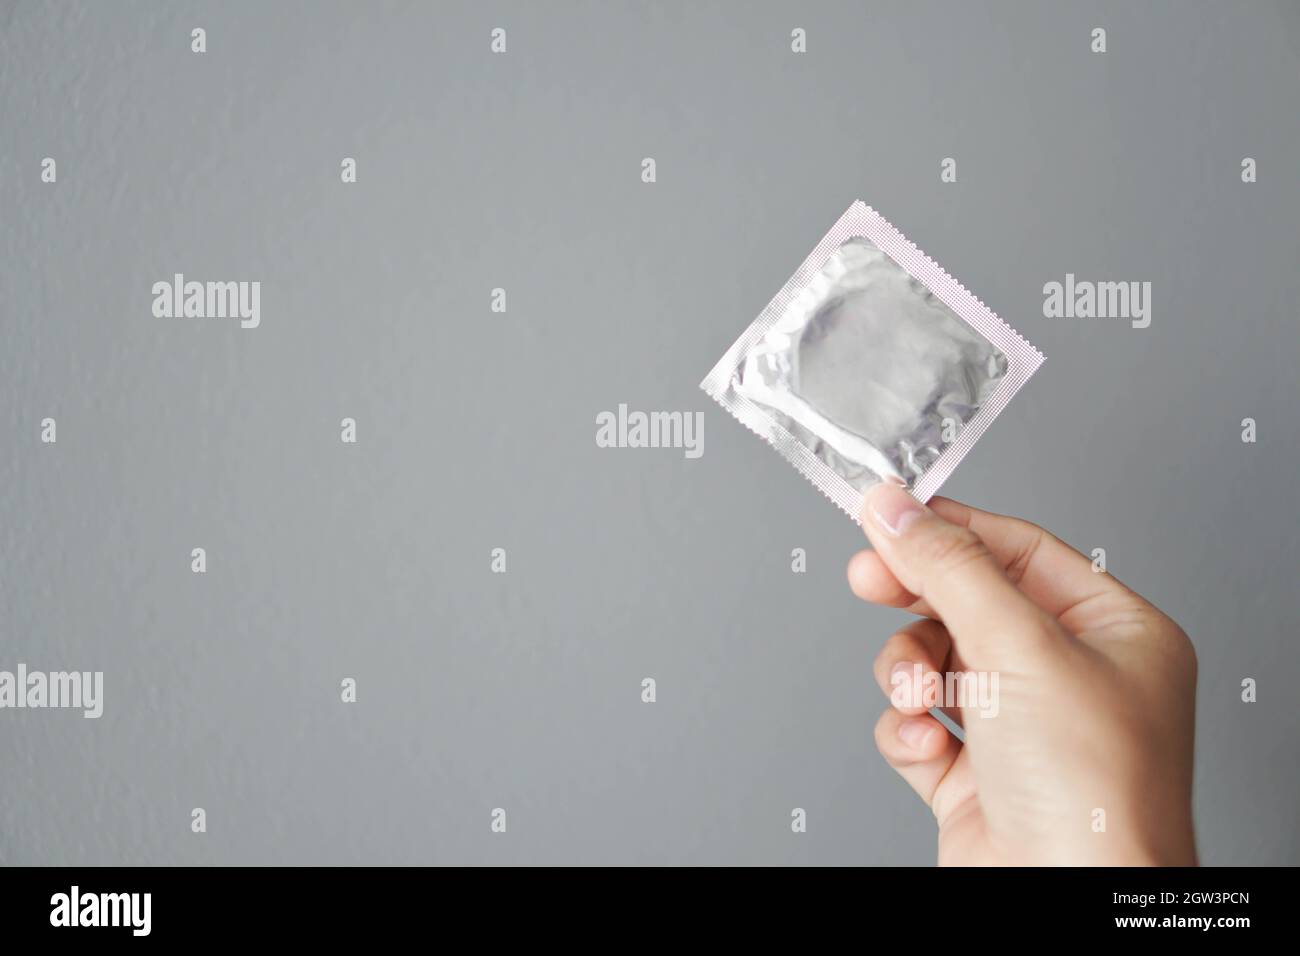 Close-up Of Hand Holding Condom Against Gray Background Stock Photo